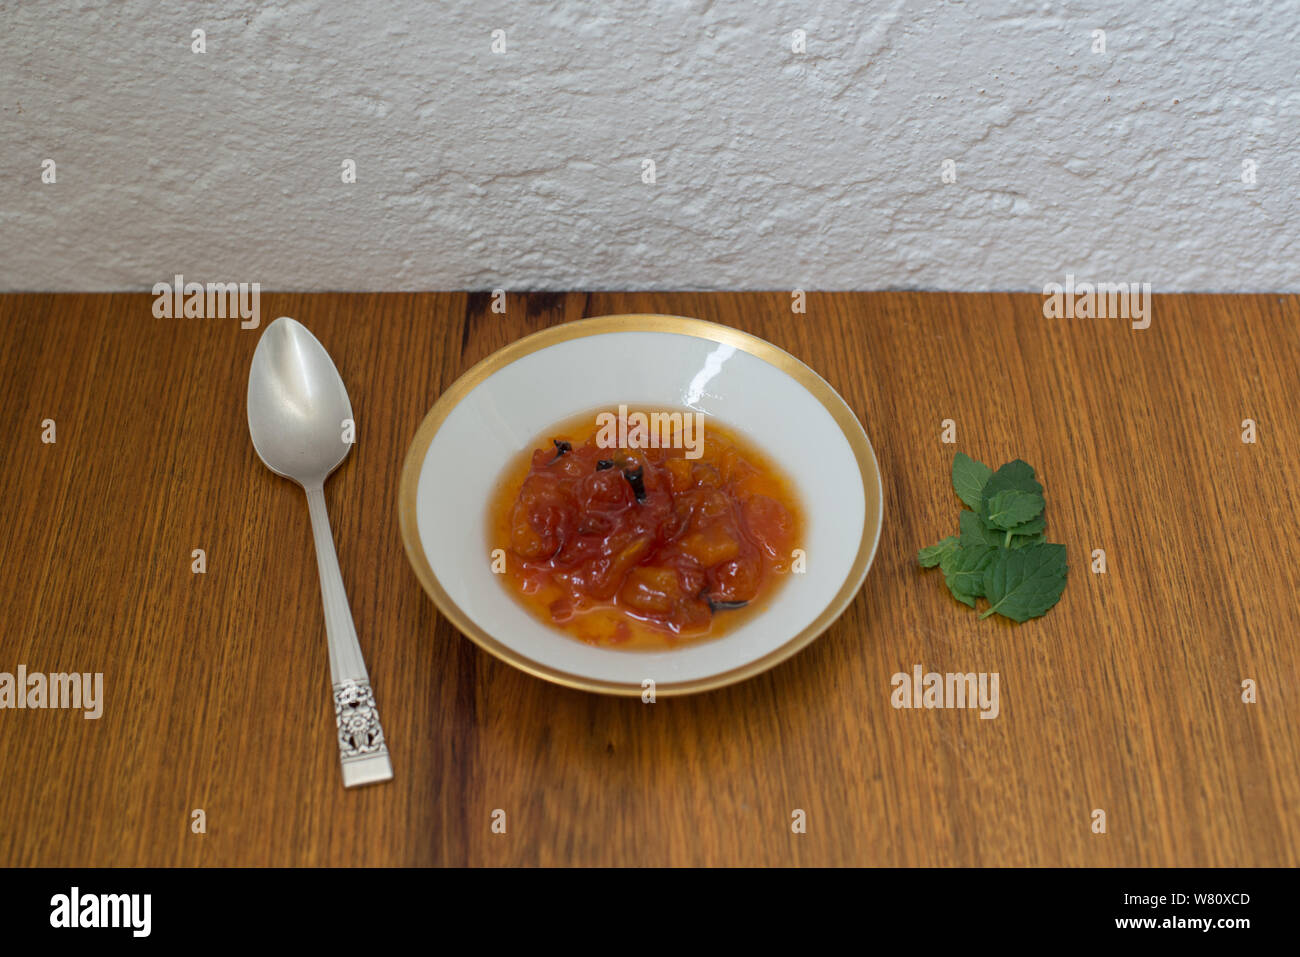 Papaya dessert Indian clove basil leaves porcelain dishes silver spoon. Photo taken in the city of Rio de Janeiro, Brazil. During the year 2019. Stock Photo